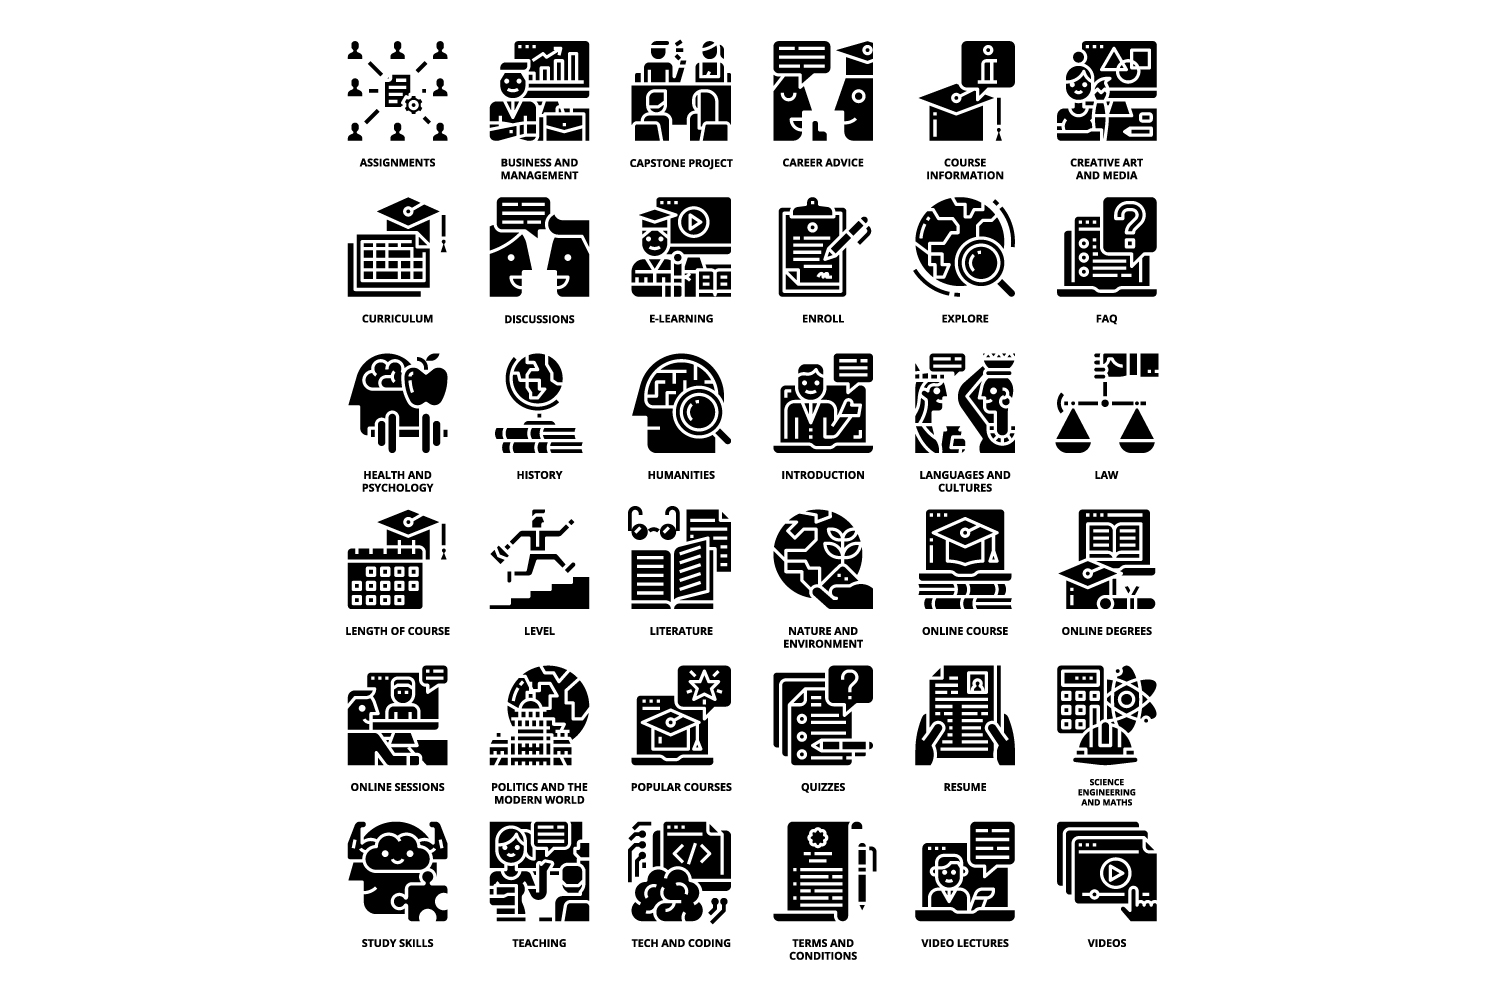 Series of black and white images with different symbols.